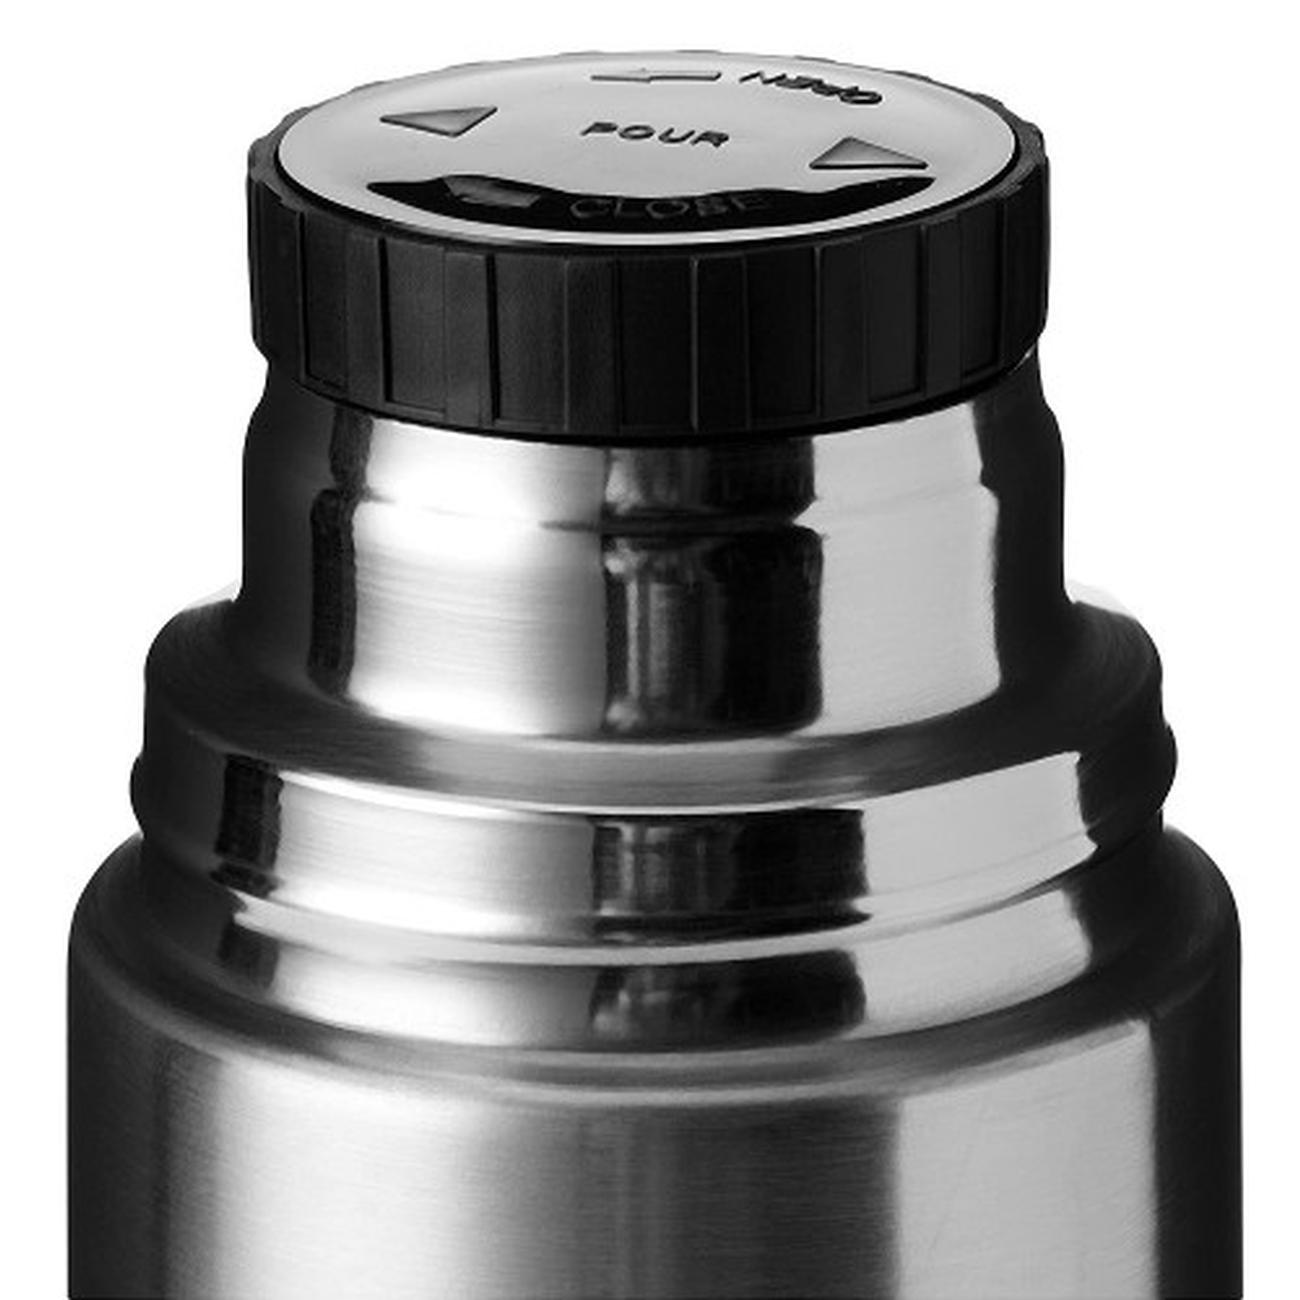 thermos-thermocafe-everyday-stainless-steel-flask-1000ml - ThermoCafe Everyday Stainless Steel Flask 1L